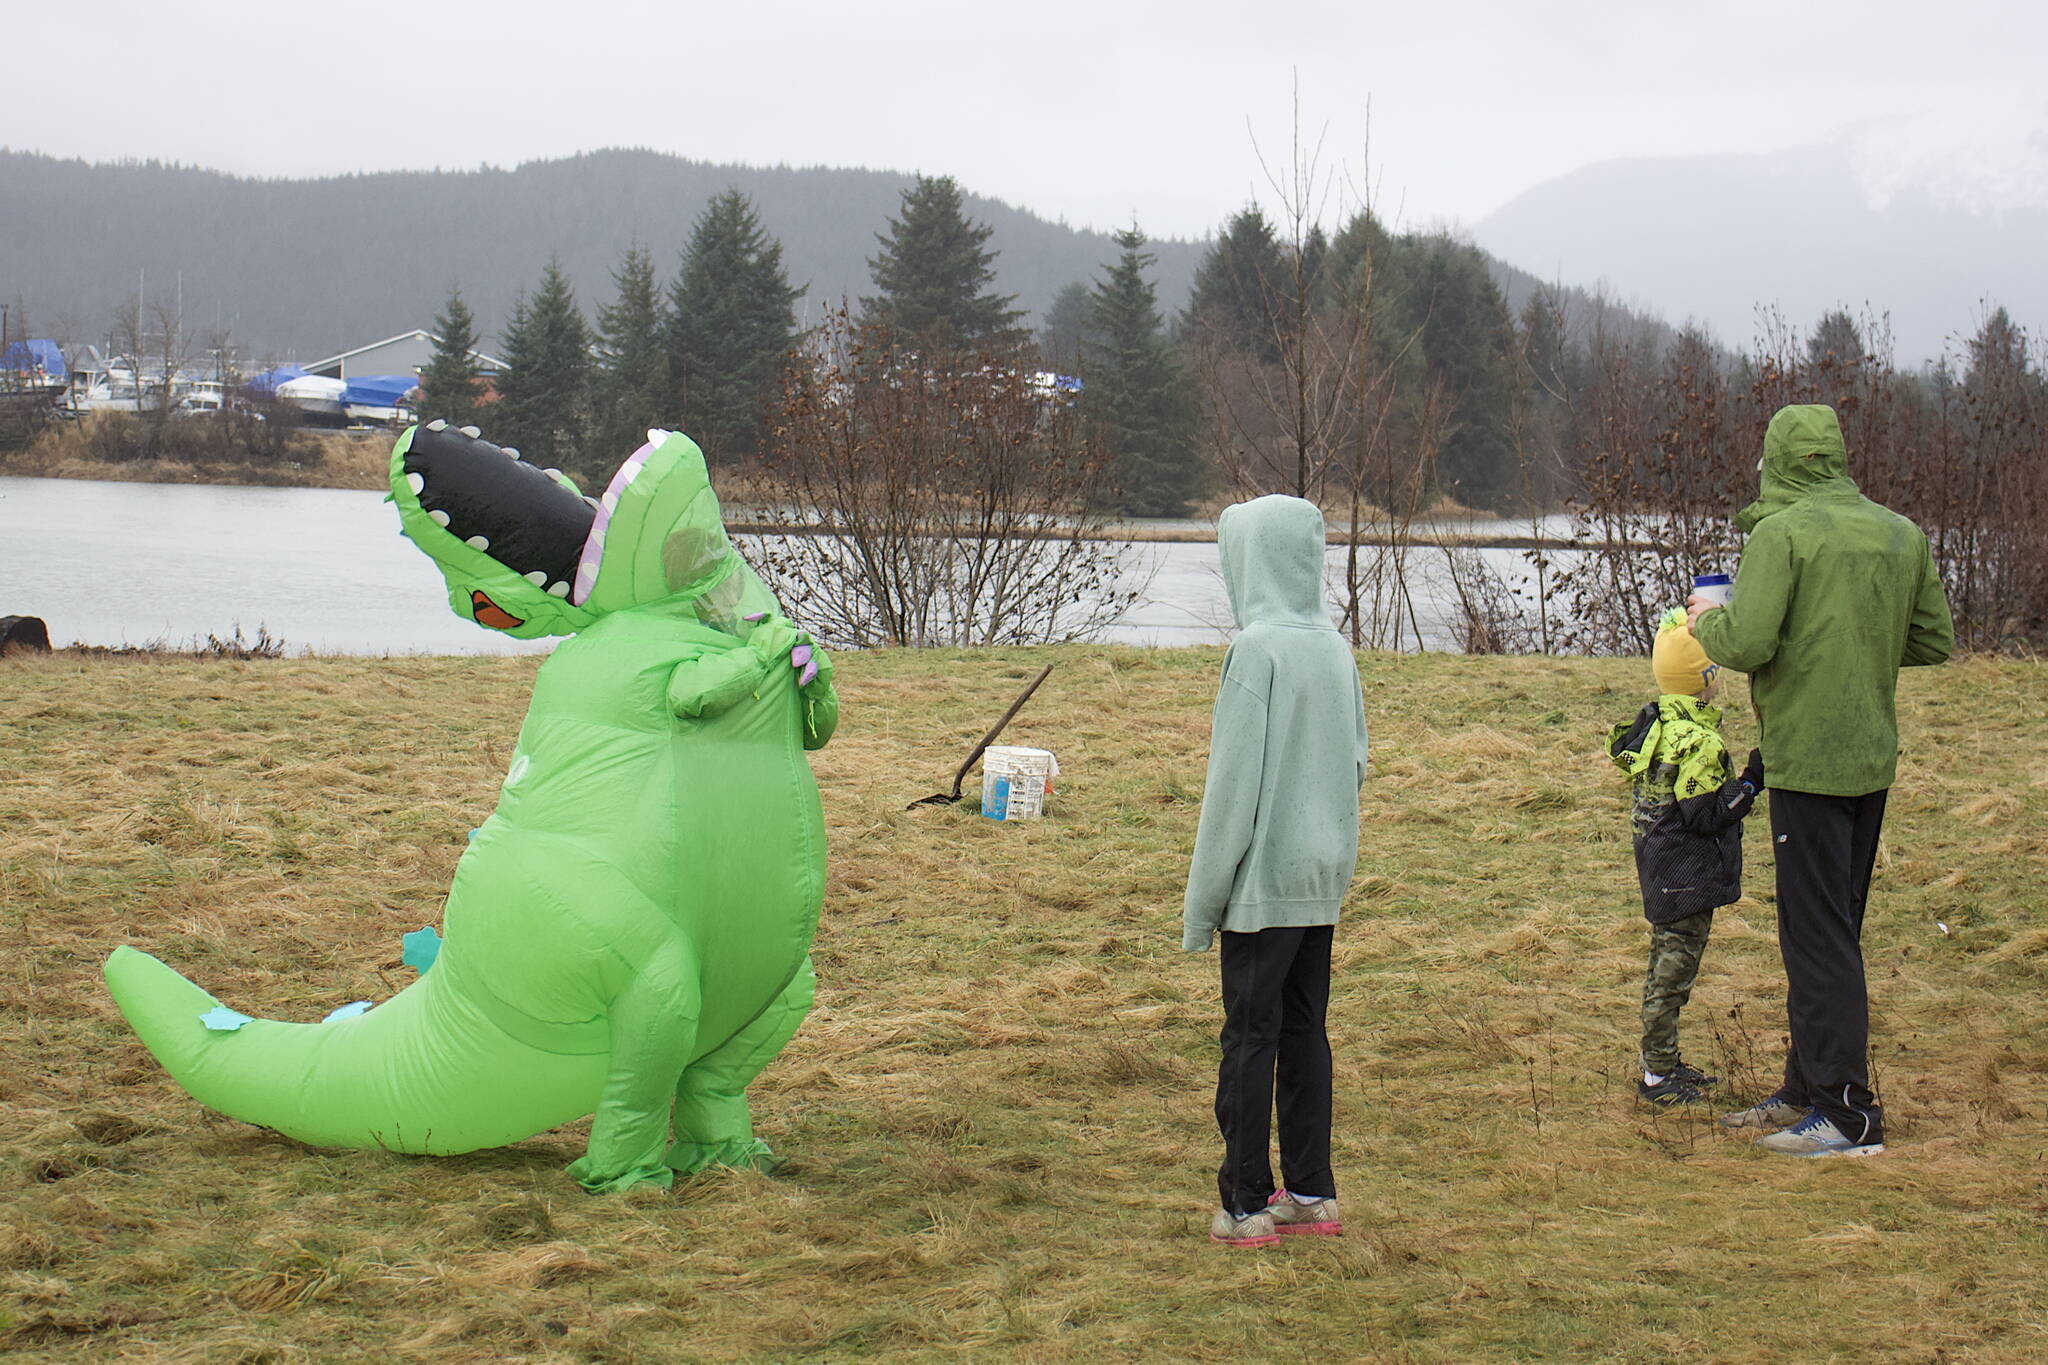 Maelee Lawrence, 11, captures the thanklessness of being an extinct species at the start/finish line of the annual Turkey Trot 5K and 1 Mile Fun Run at the Airport Dike Trail on Thursday morning. (Mark Sabbatini / Juneau Empire)